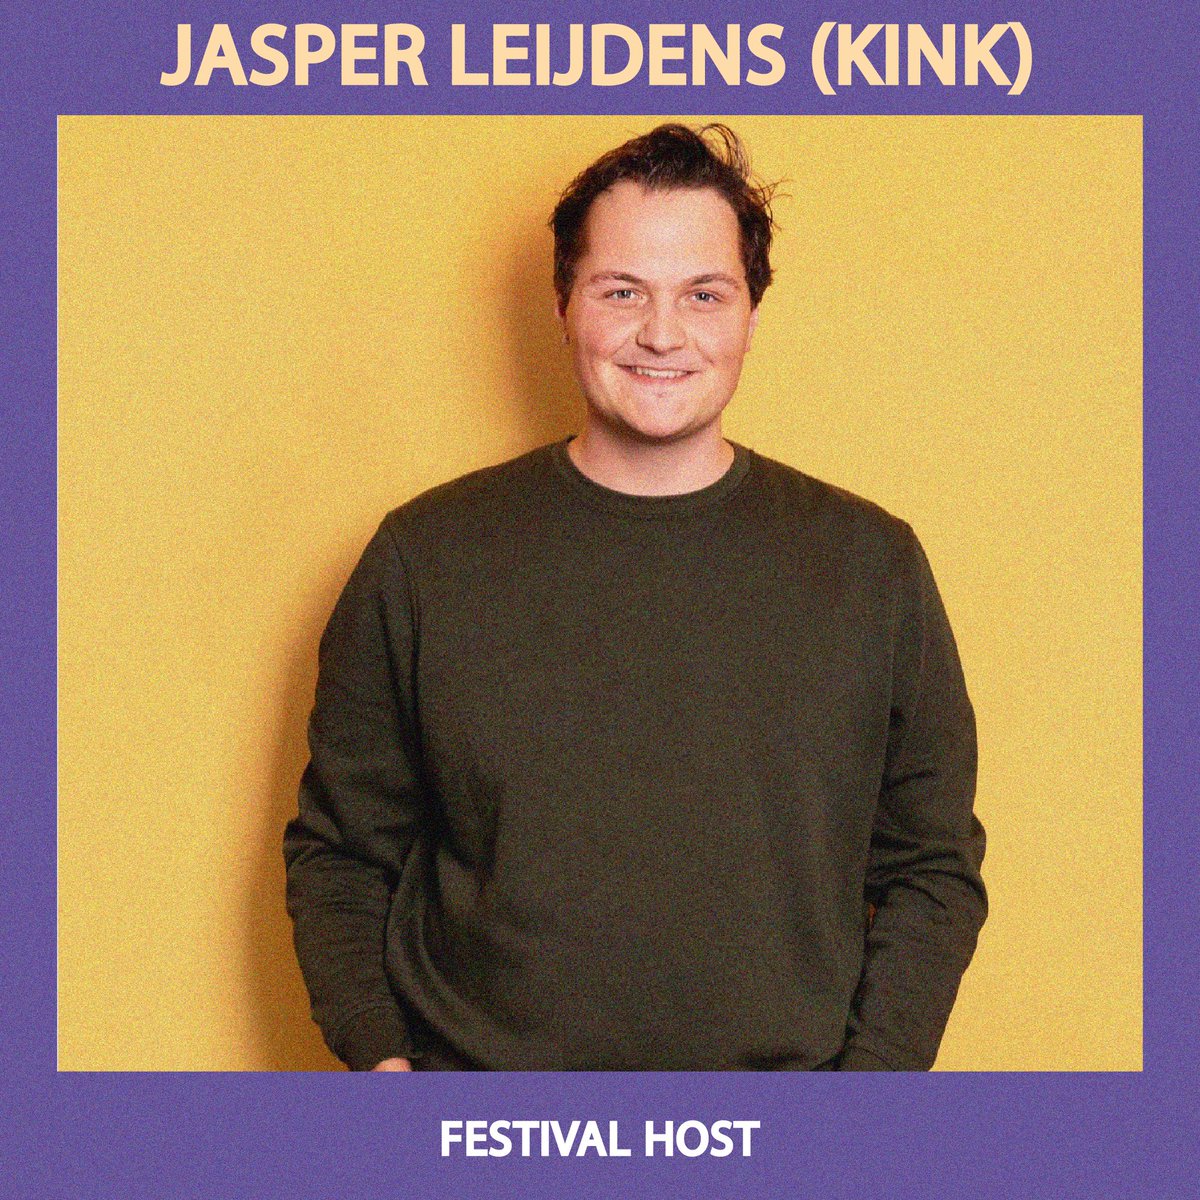 We’re excited to announce that @kinkpuntnl’s very own Jasper Leijdens is your ViceFest stage host this year! 🔥